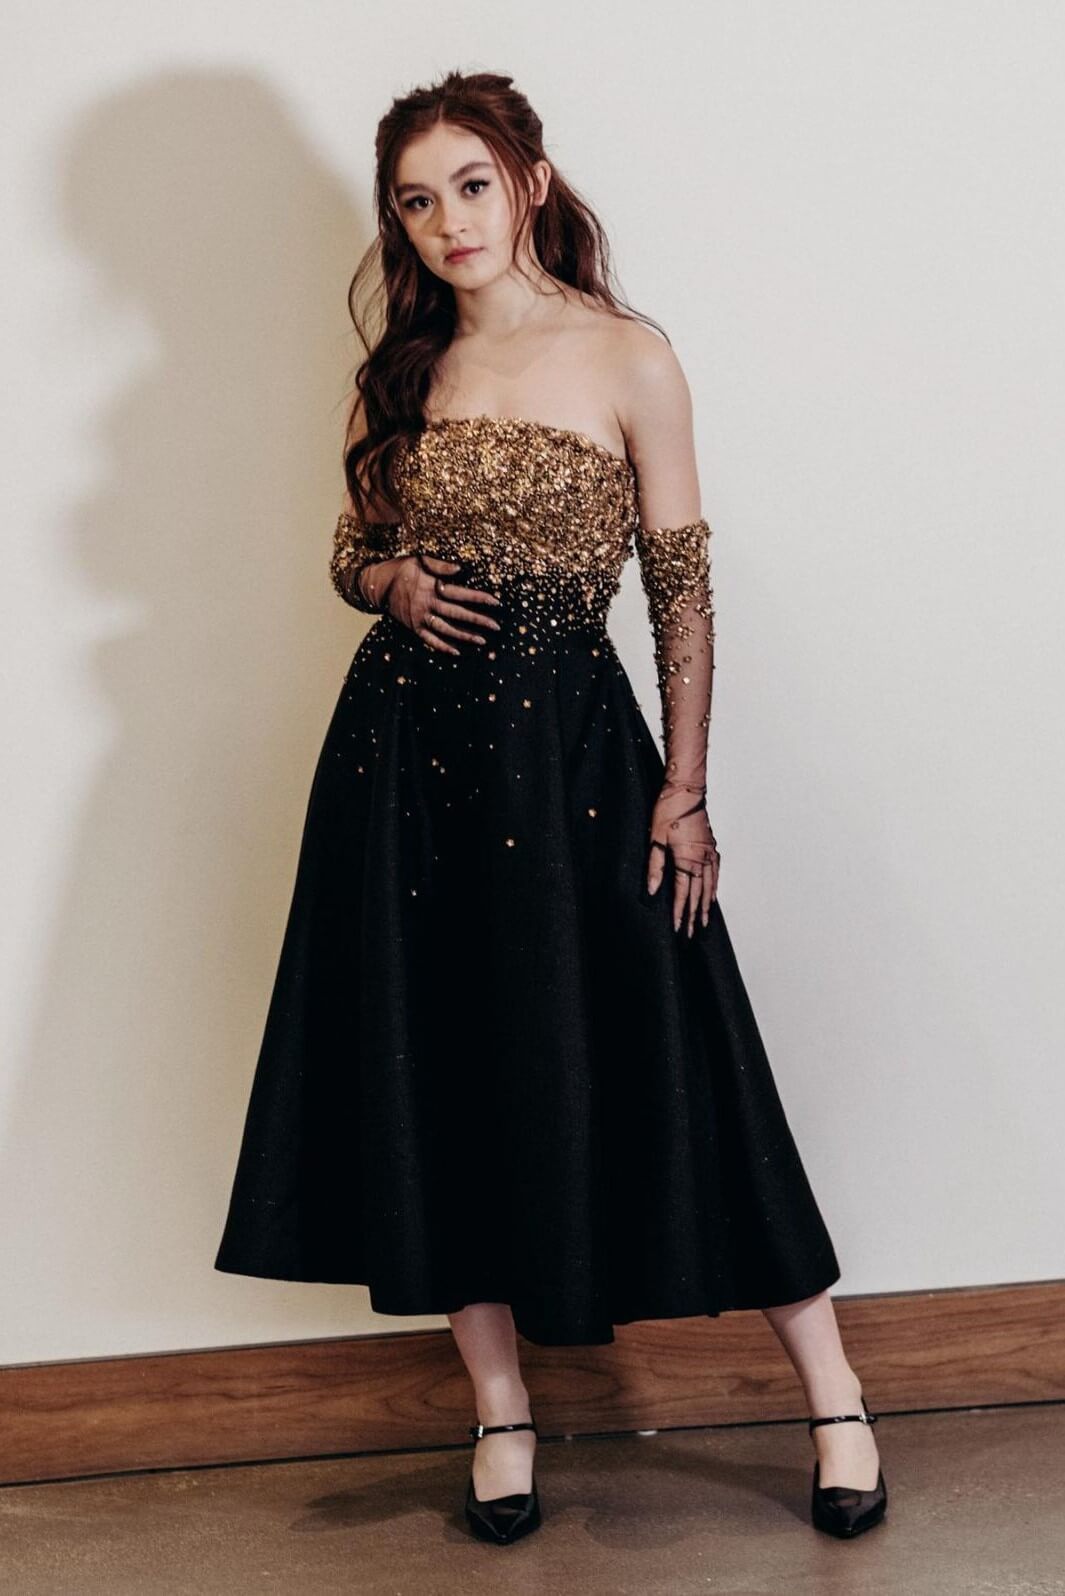 Anna Cathcart In Black With Golden Sparkling Embroidery Strapless Long Gown With Net Shimmery Hand Gloves